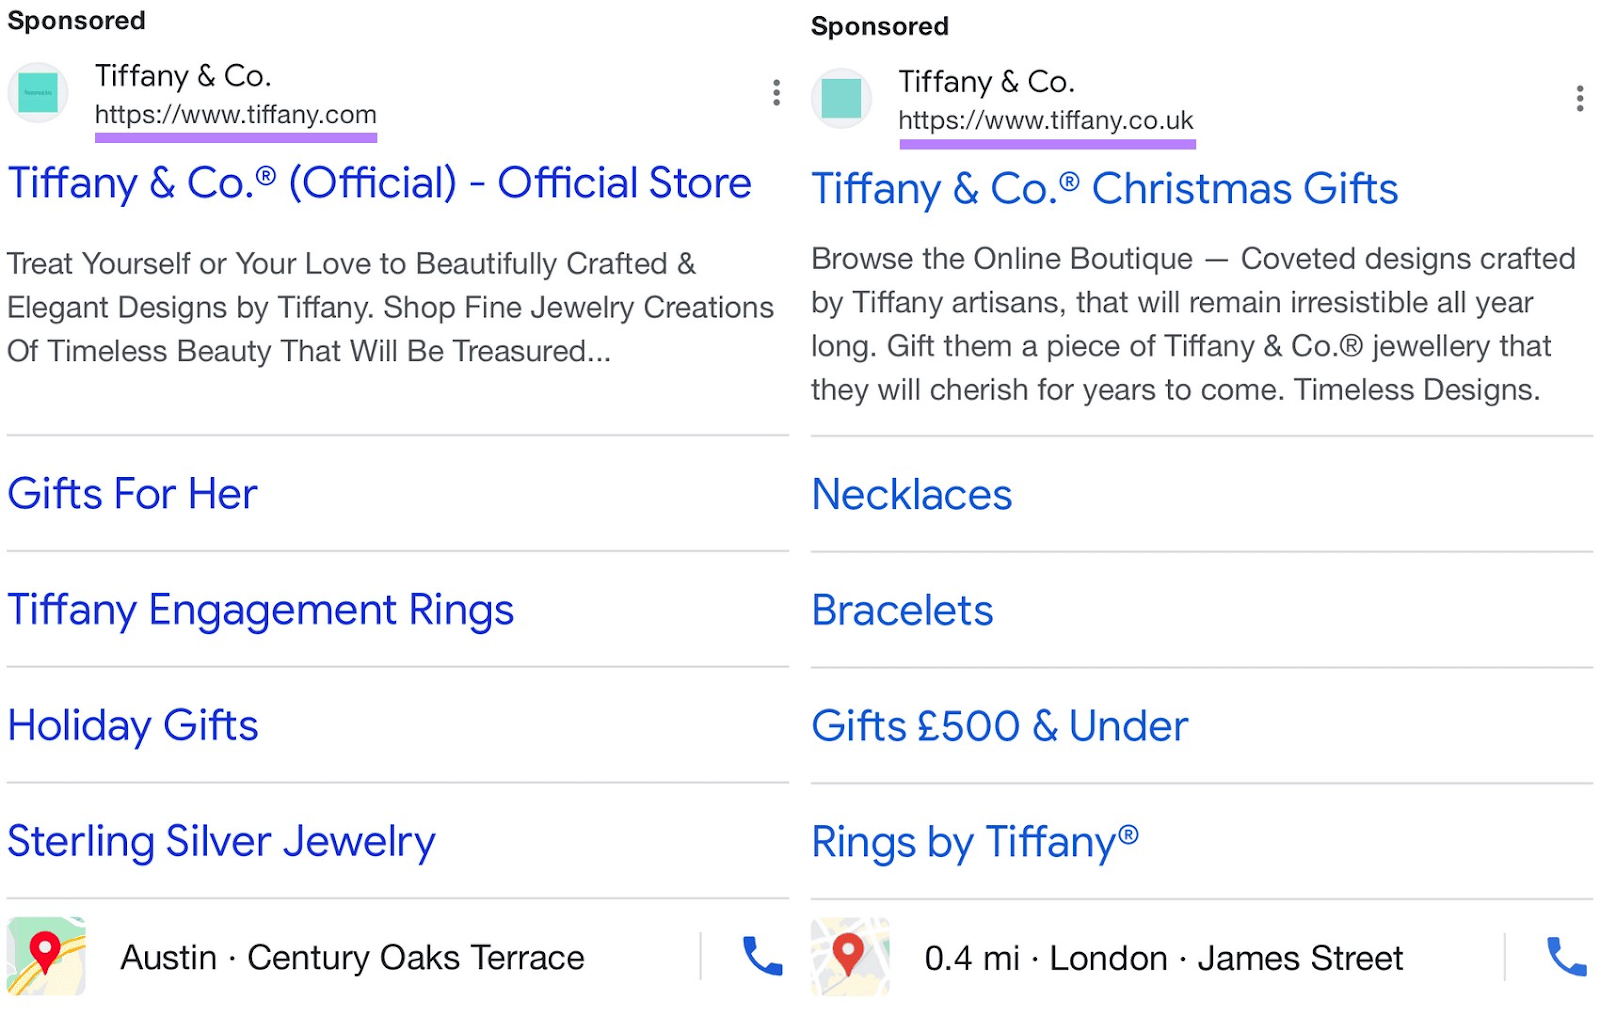 A side by side comparison of Tiffany & Co.'s mobile ad, with "tiffany.com" highlighted in the US ad, and "tiffany.co.uk" in the UK ad